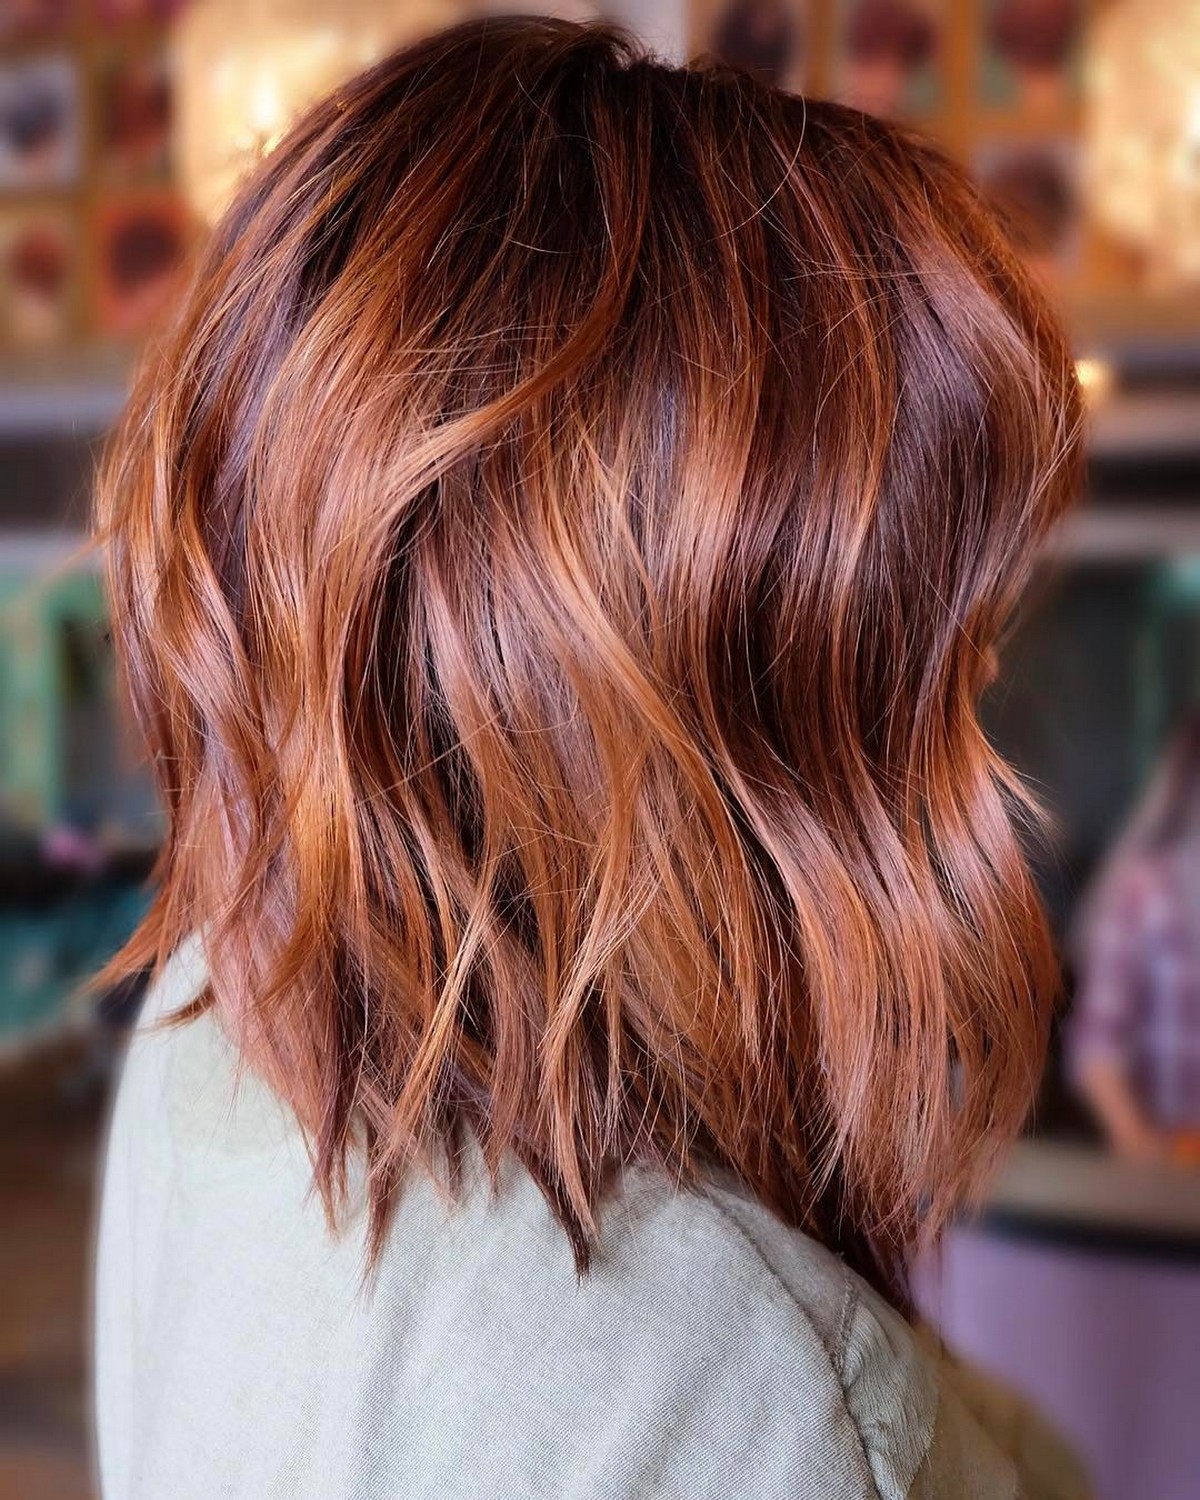 Layered Shoulder-Length Bob With Copper Balayage